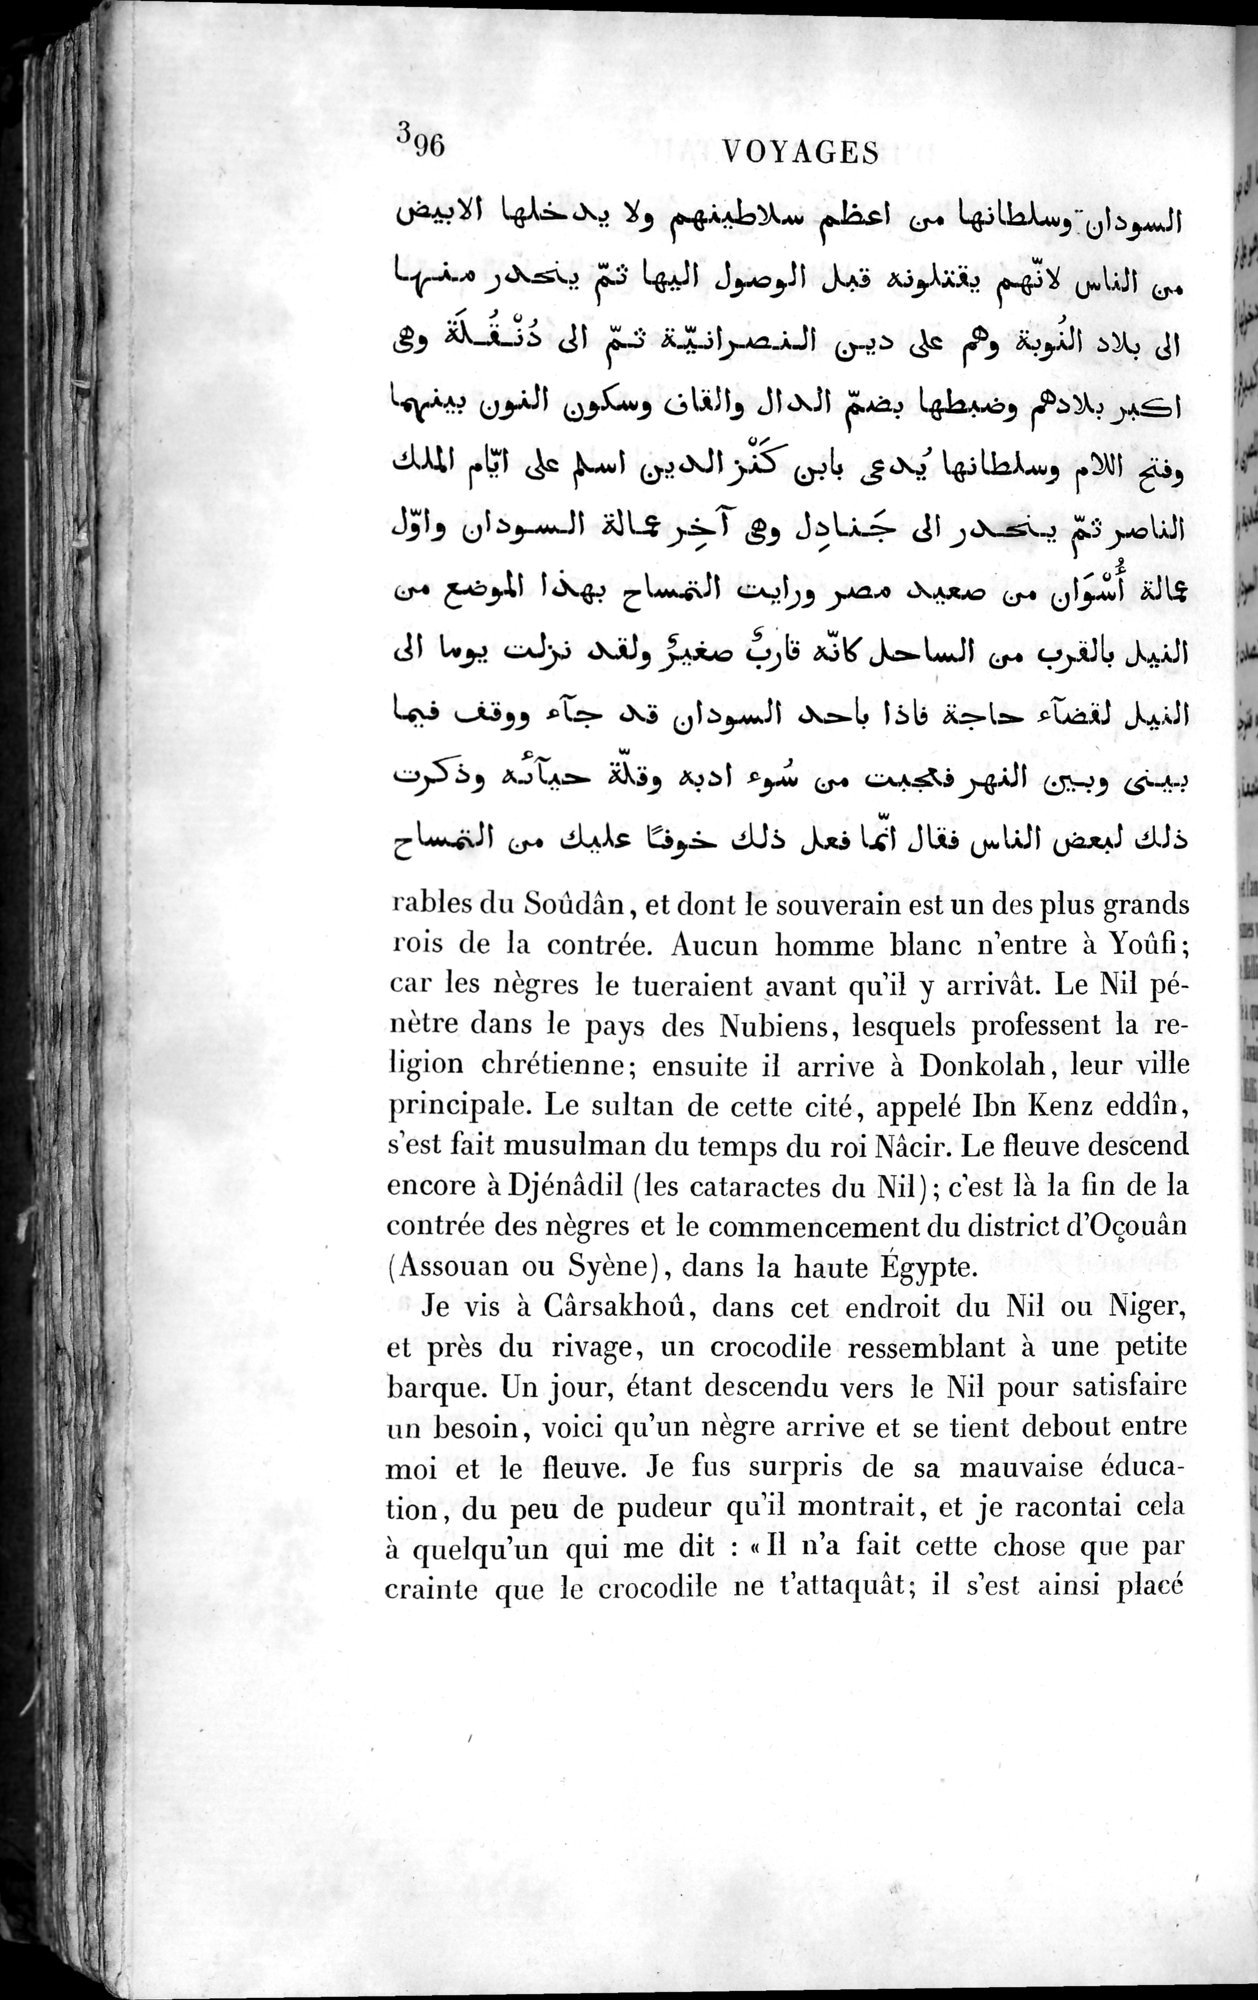 Voyages d'Ibn Batoutah : vol.4 / Page 408 (Grayscale High Resolution Image)